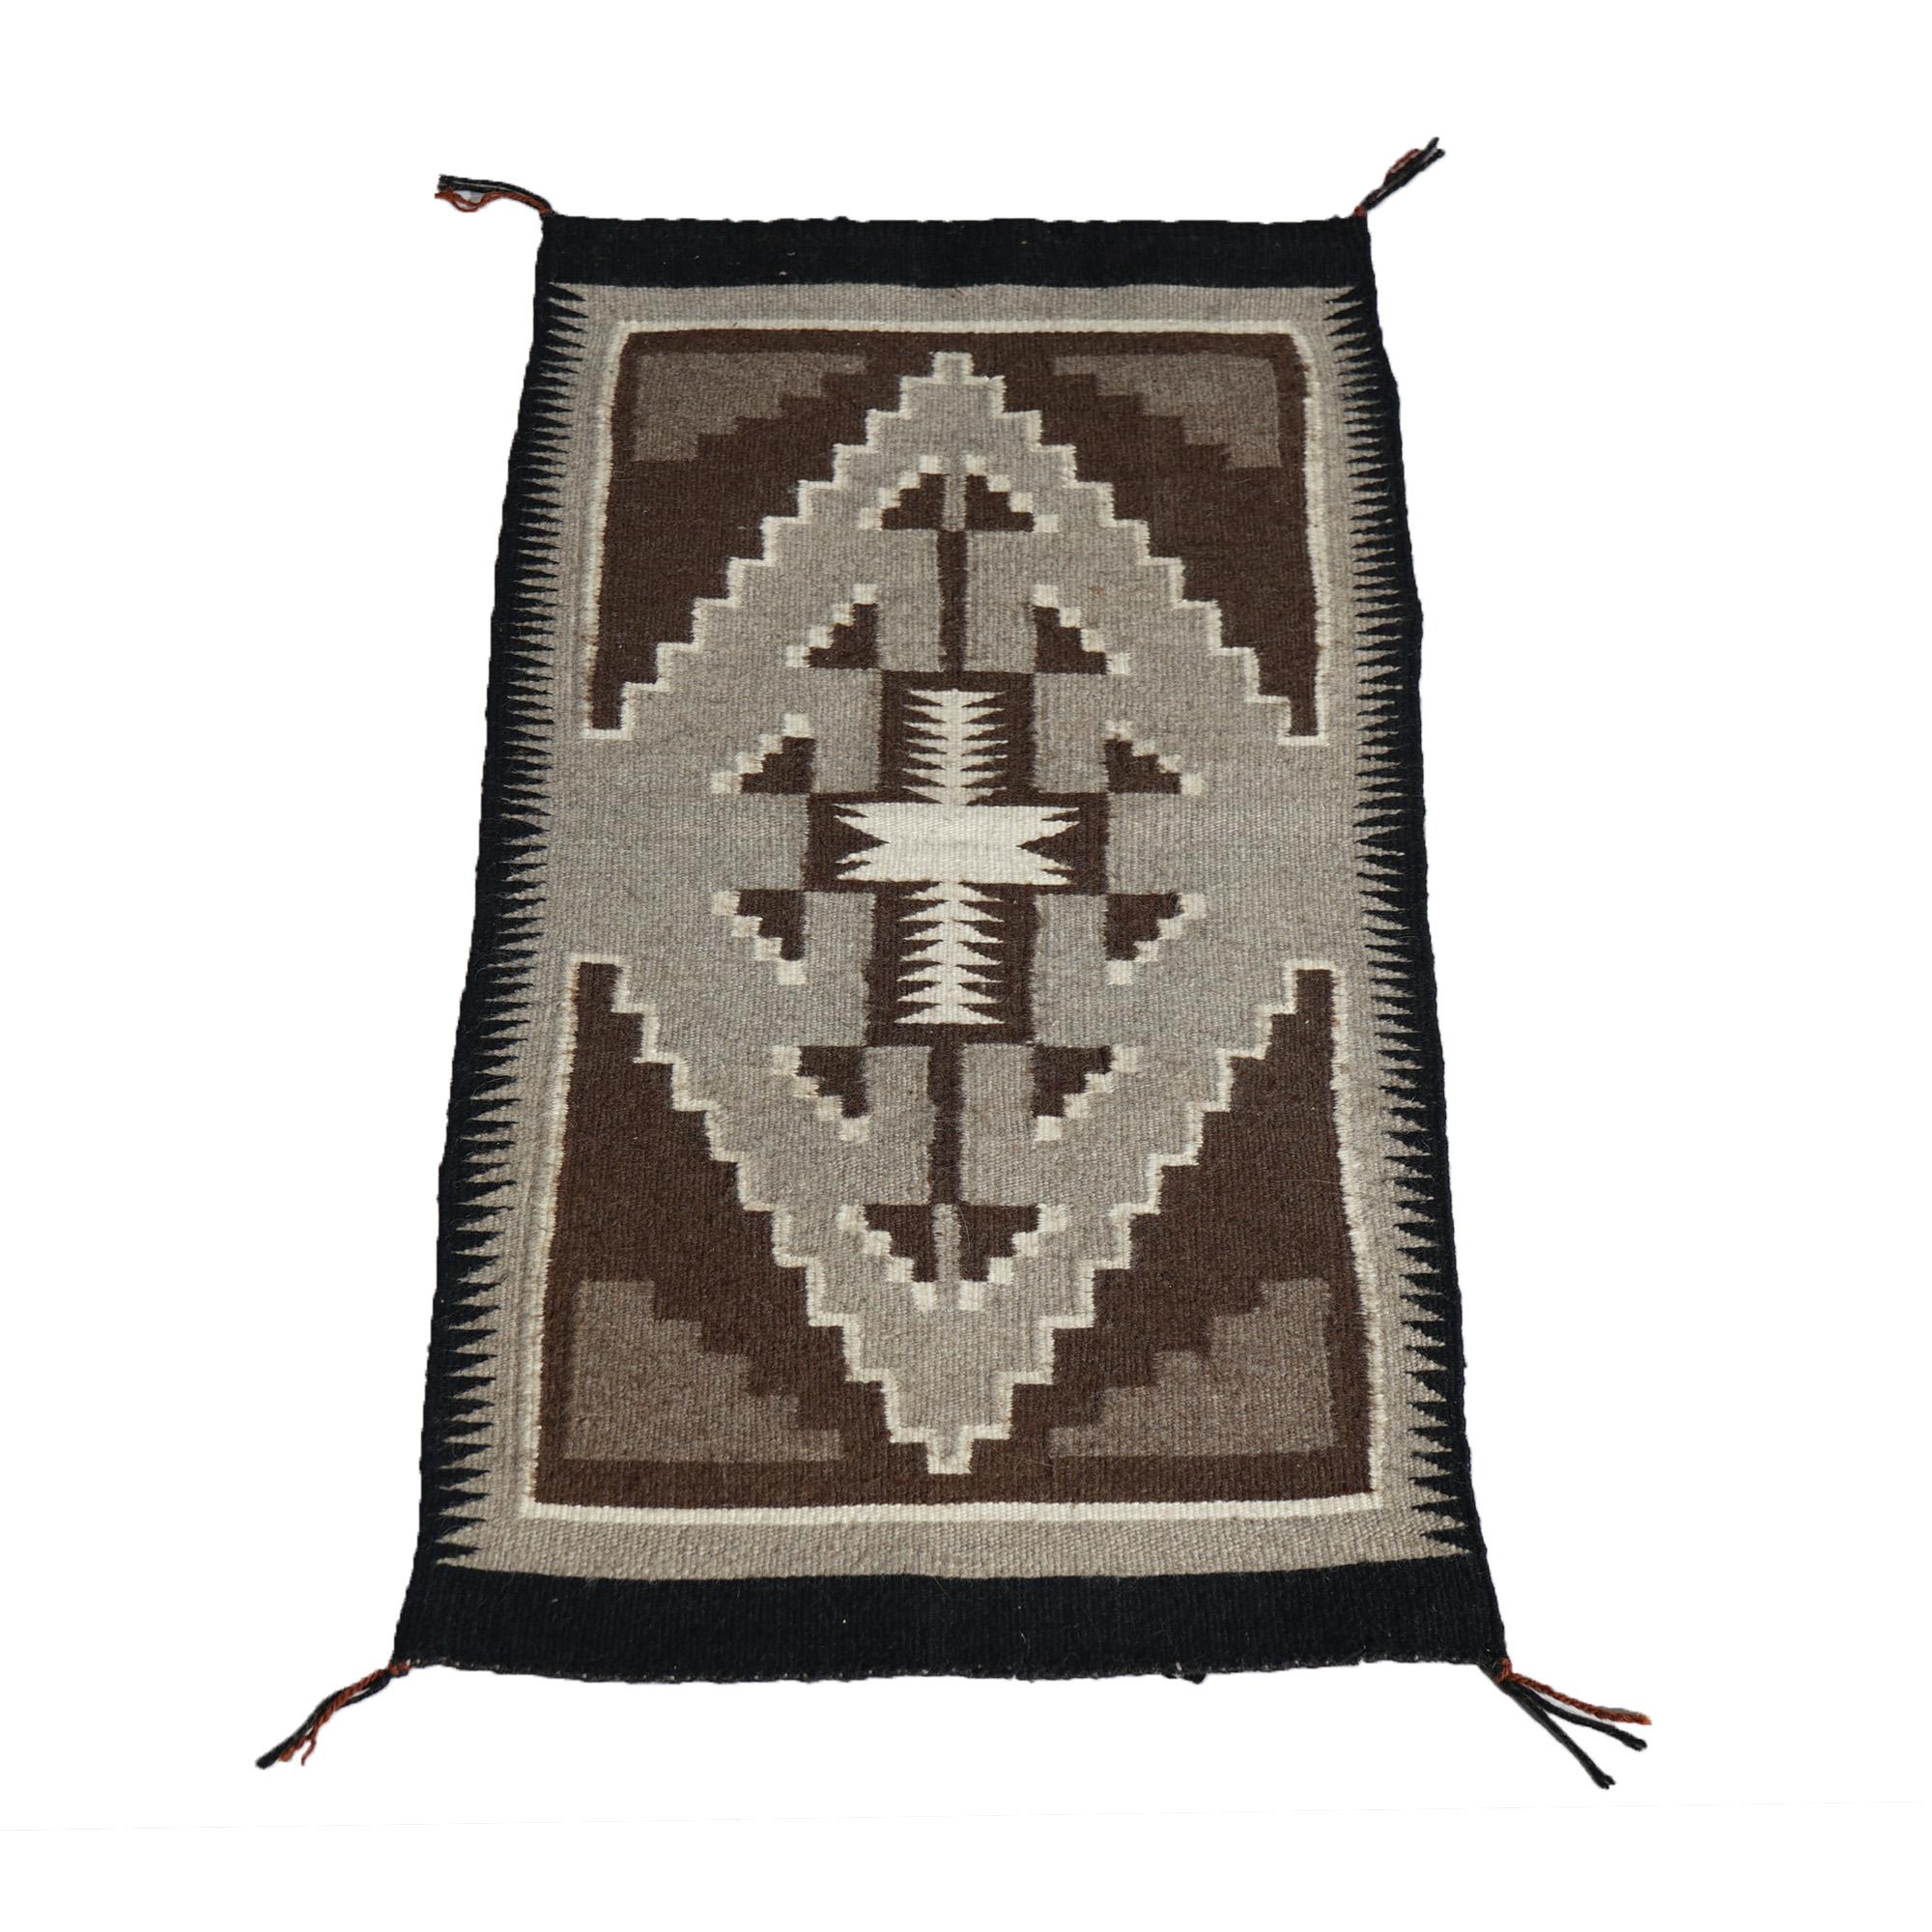 Antique Southwestern Native American Indian Navajo Style Wool Rug with Serrated Central Medallion C1930

Measures- 34.5''H x 17.5''W x .5''D